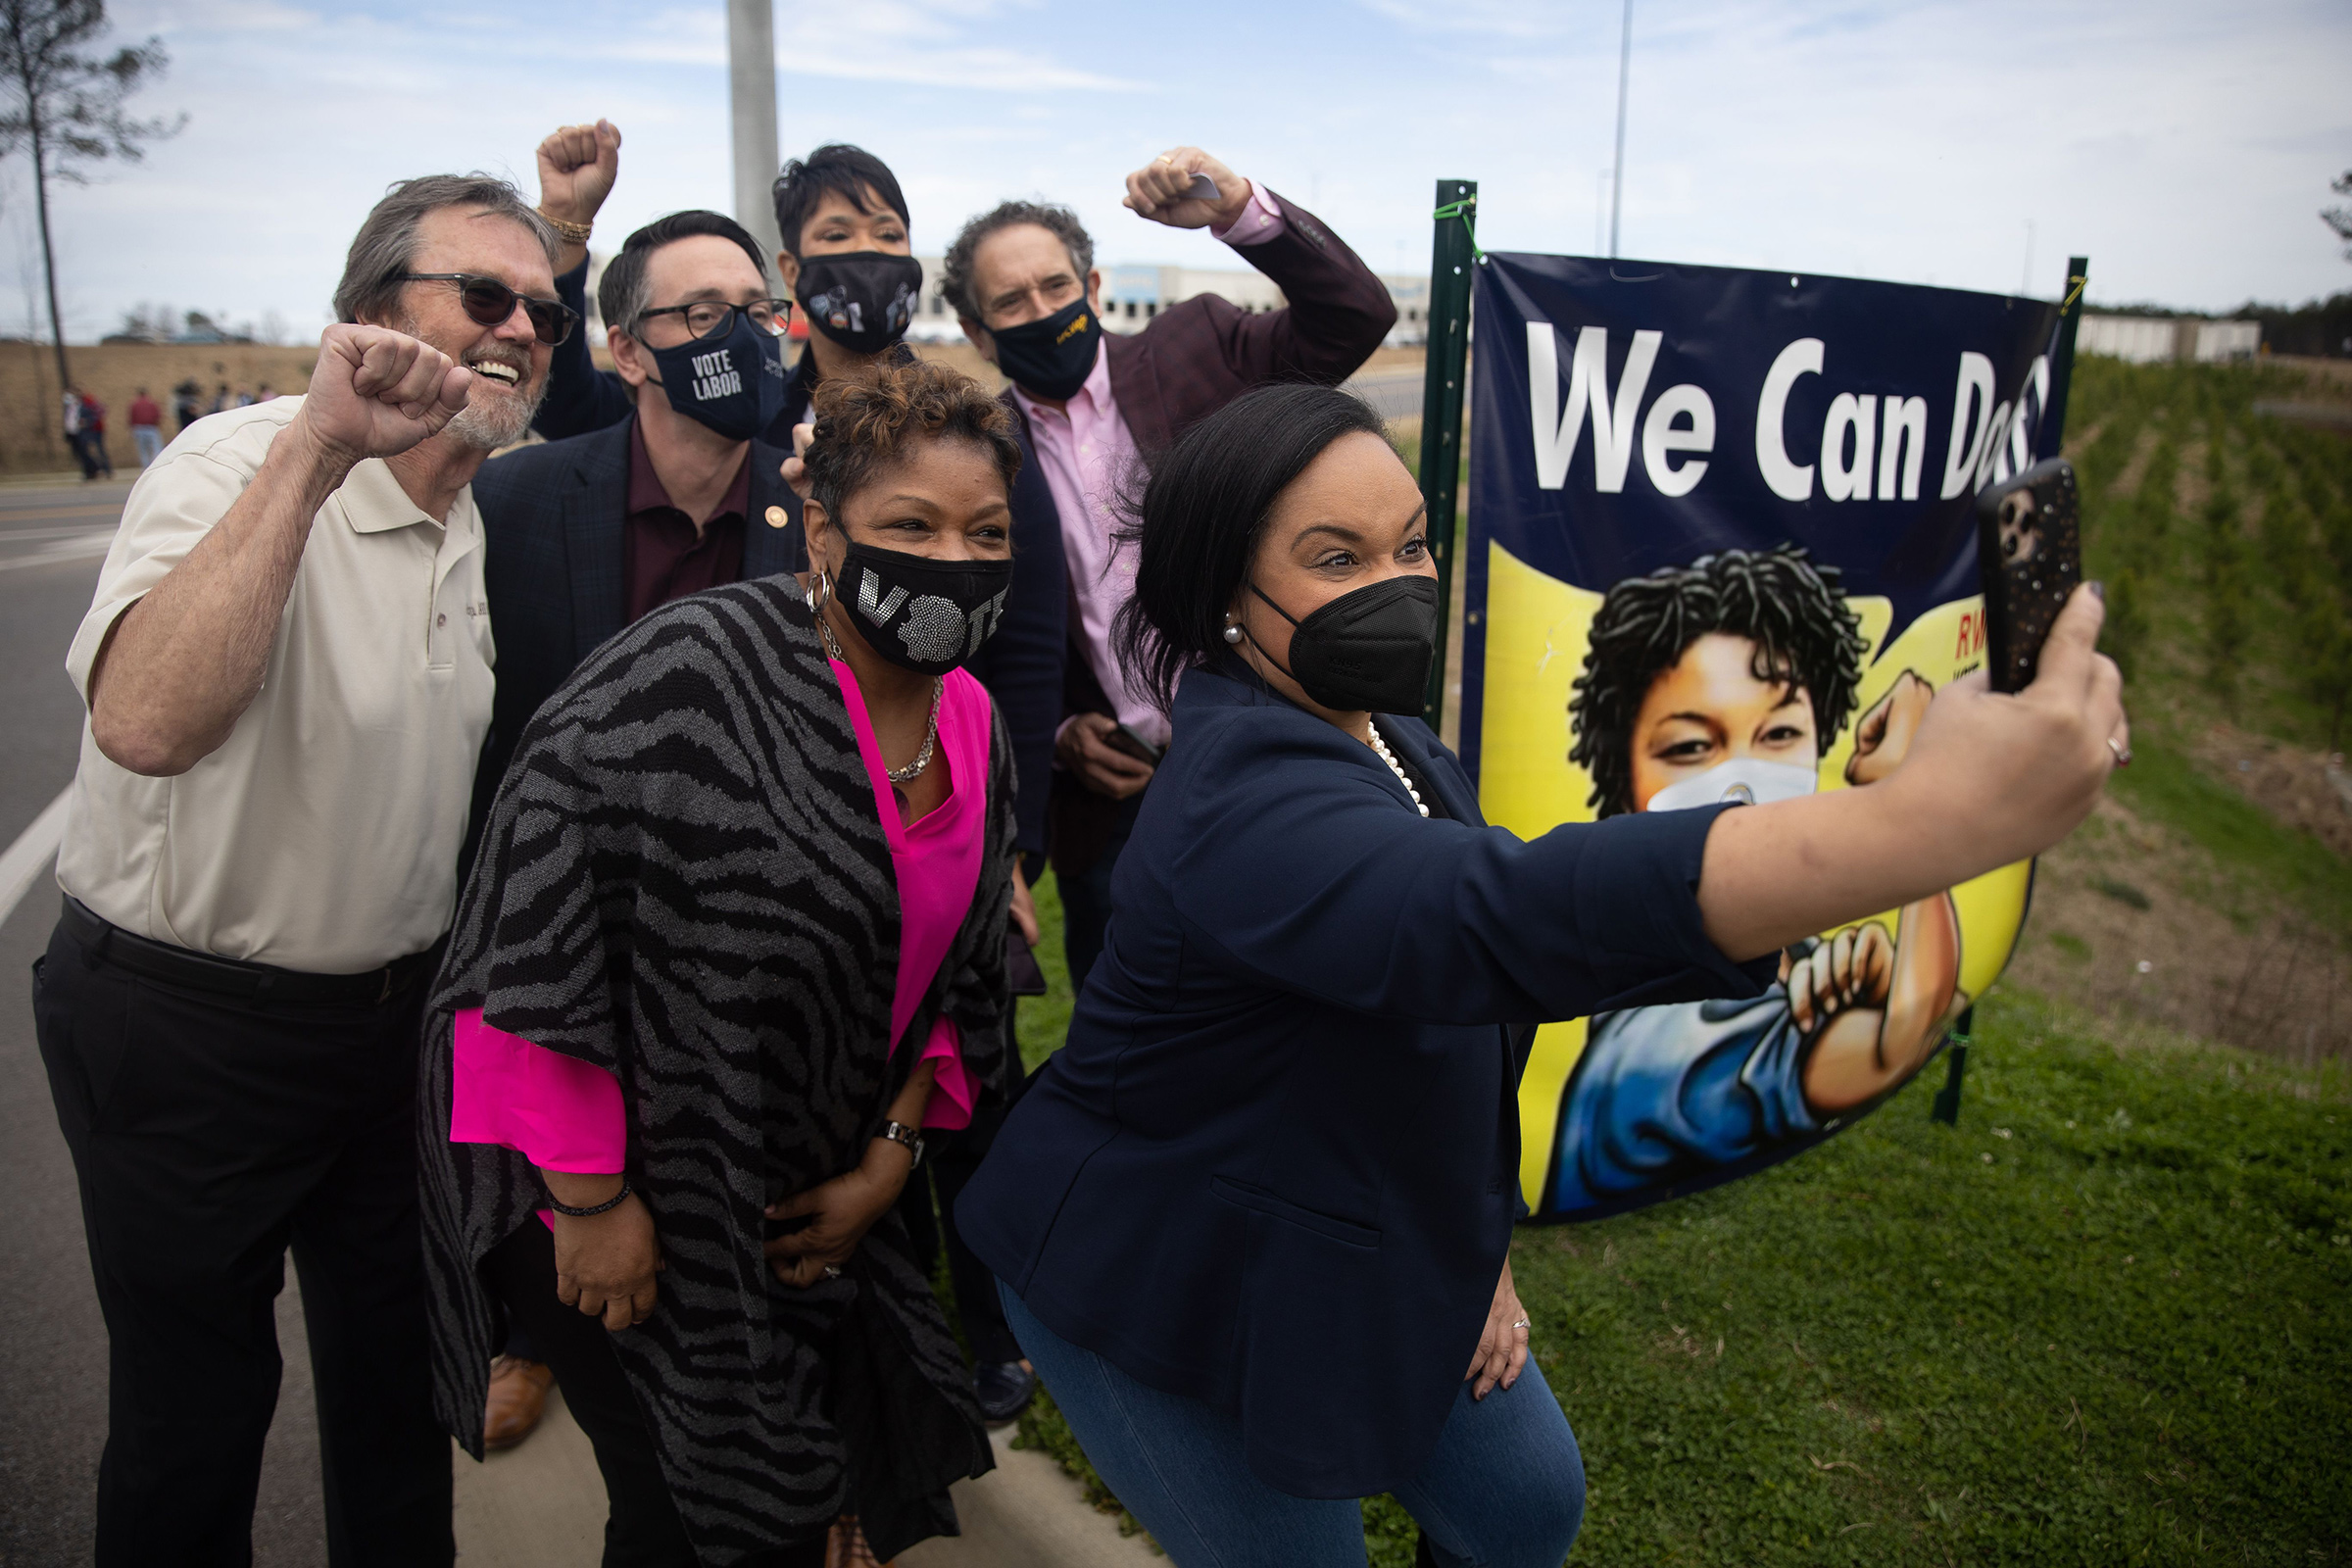 Congressman Nikema Williams meets union organizers outside of the Amazon BHM1 facility during a congressional visit to the site in Birmingham, Ala., on March 5, 2021.